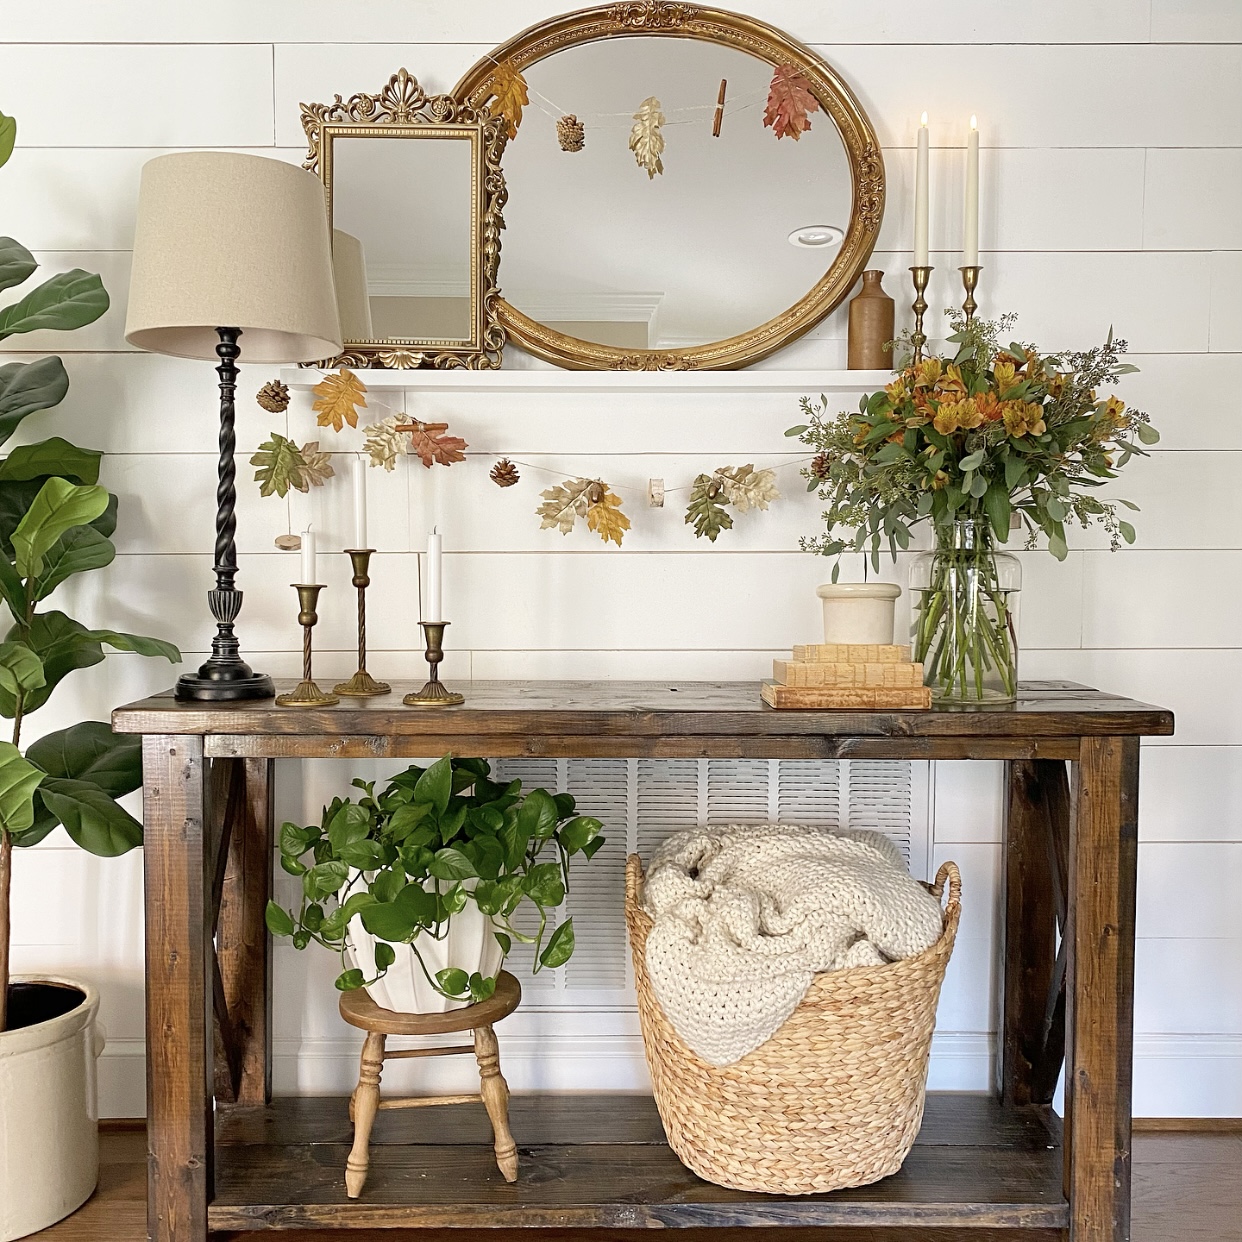 Table in foyer with shelf on the wall above it. Shelf holds layered vintage mirrors and easy Fall garland hanging from them.